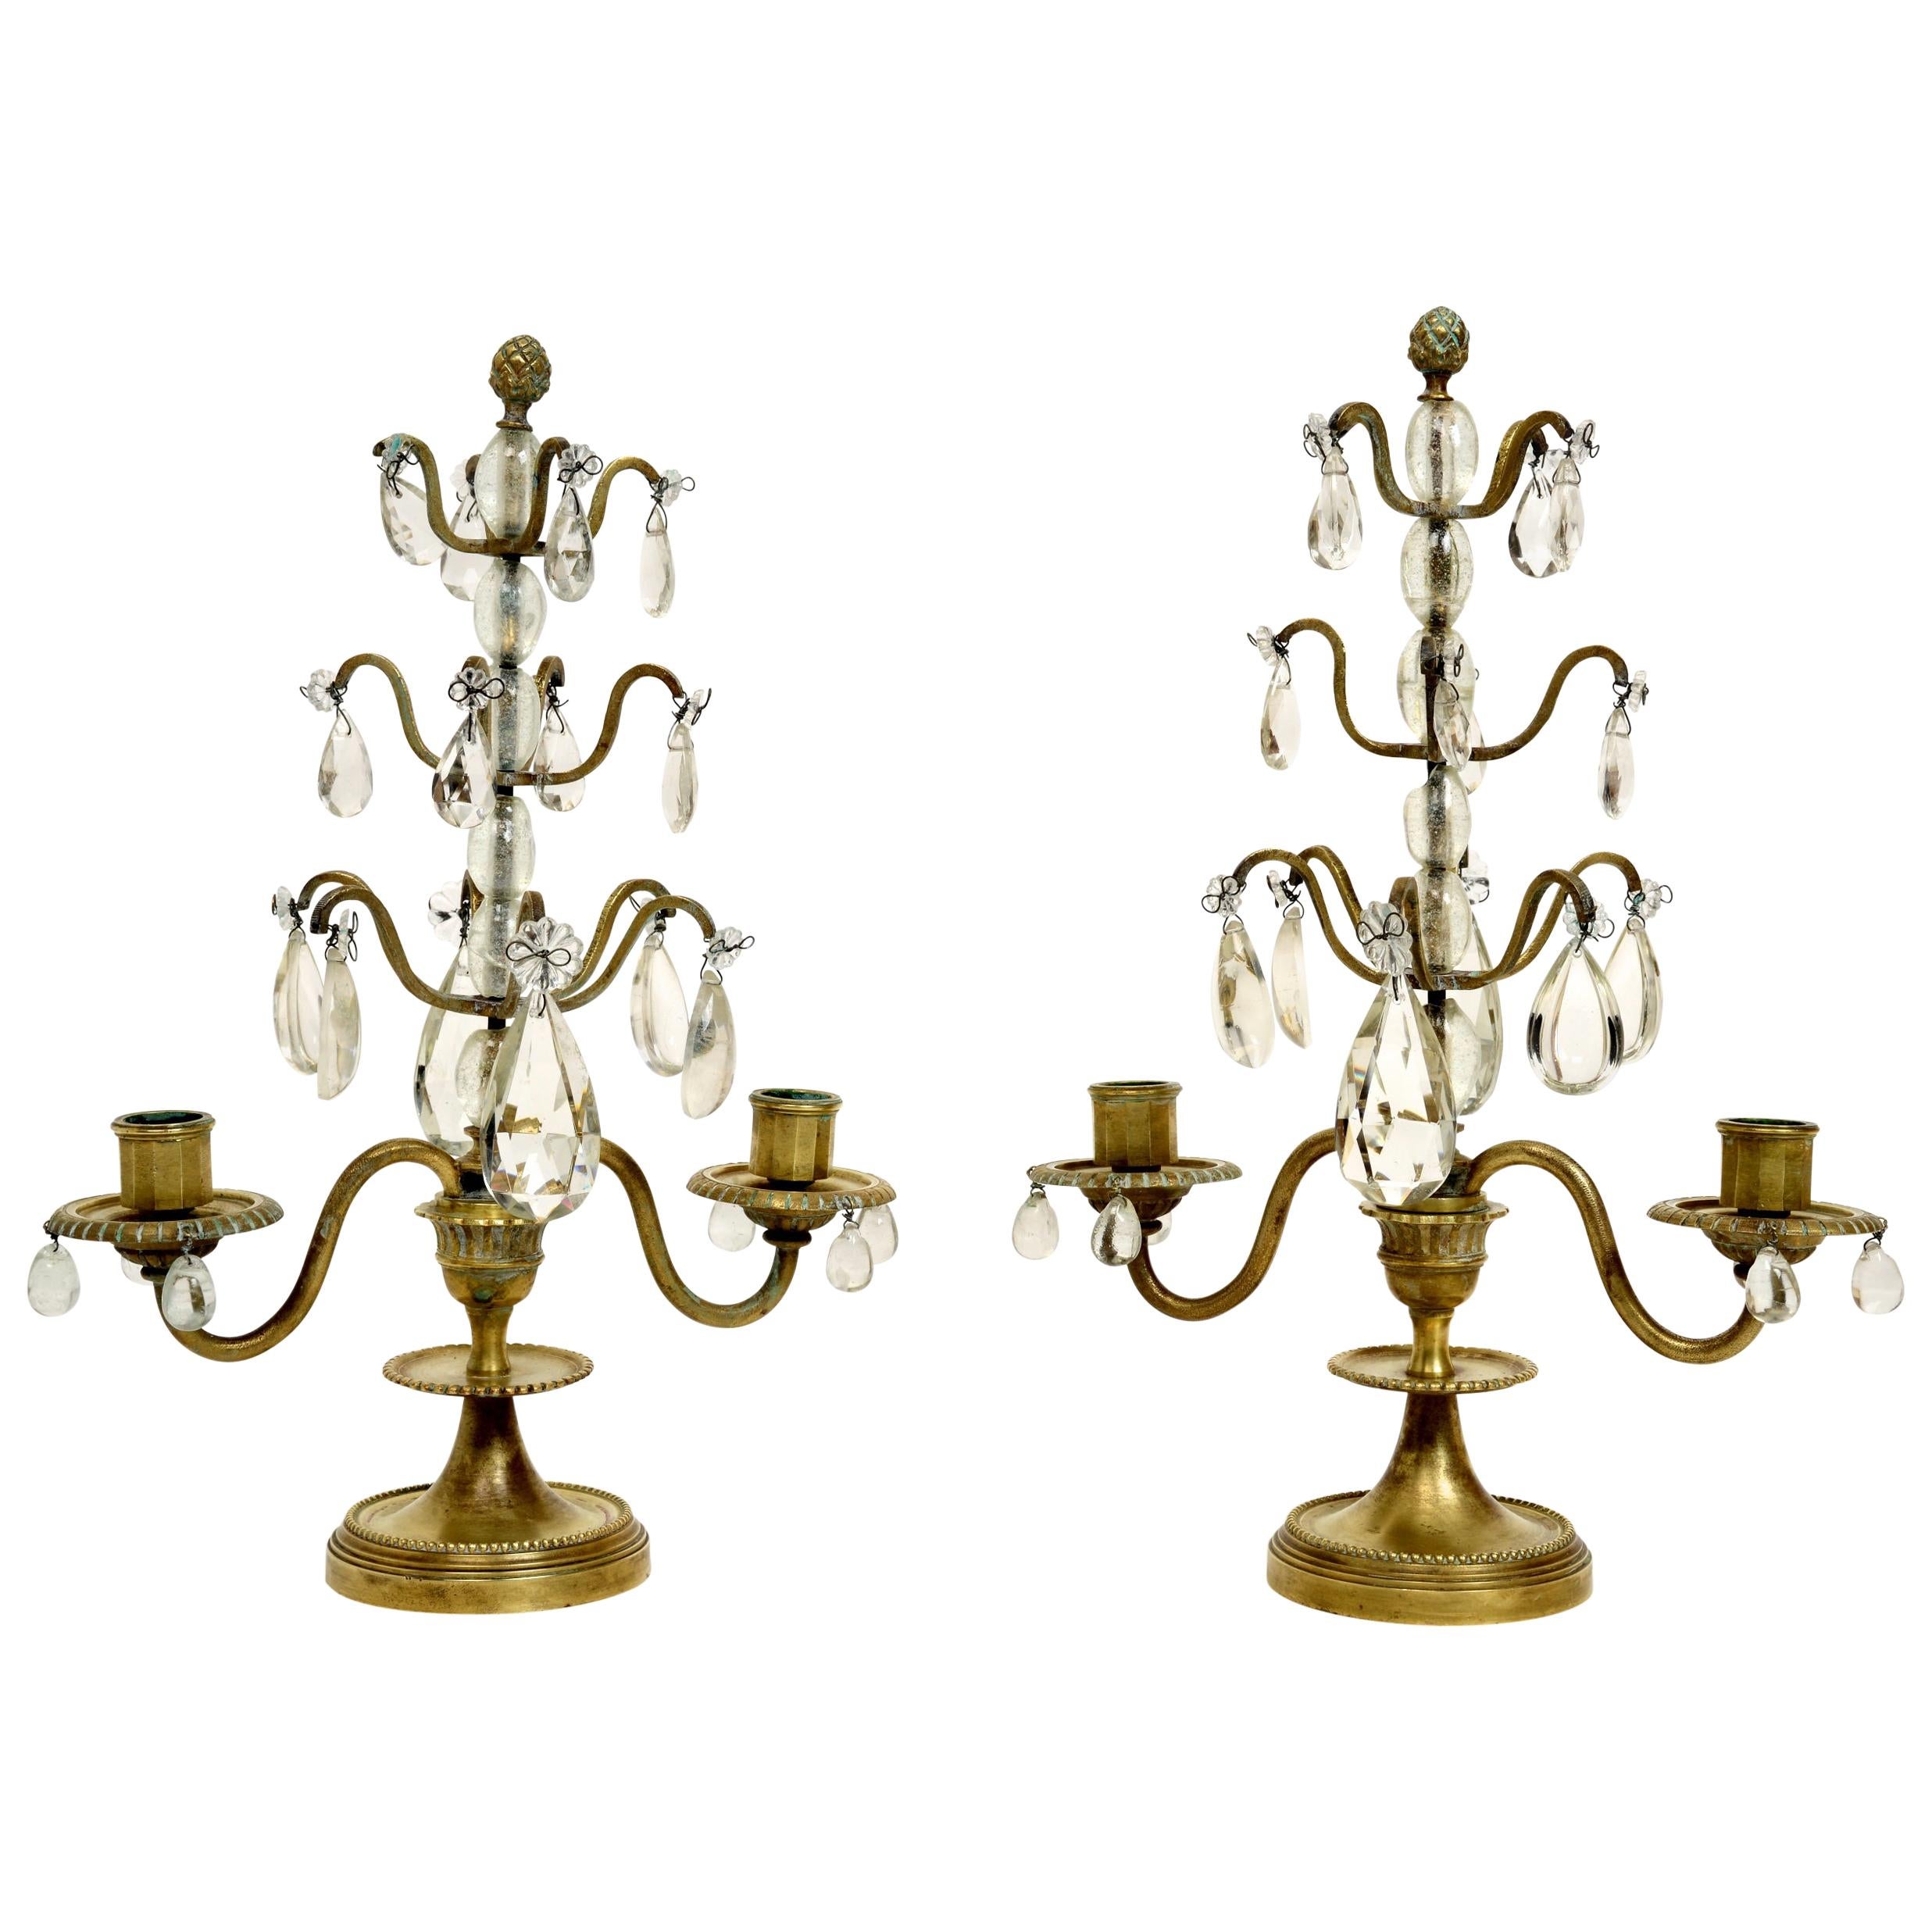 Pair of Rock Crystal, Lead Crystal and Brass Candelabra, Late 19th Century